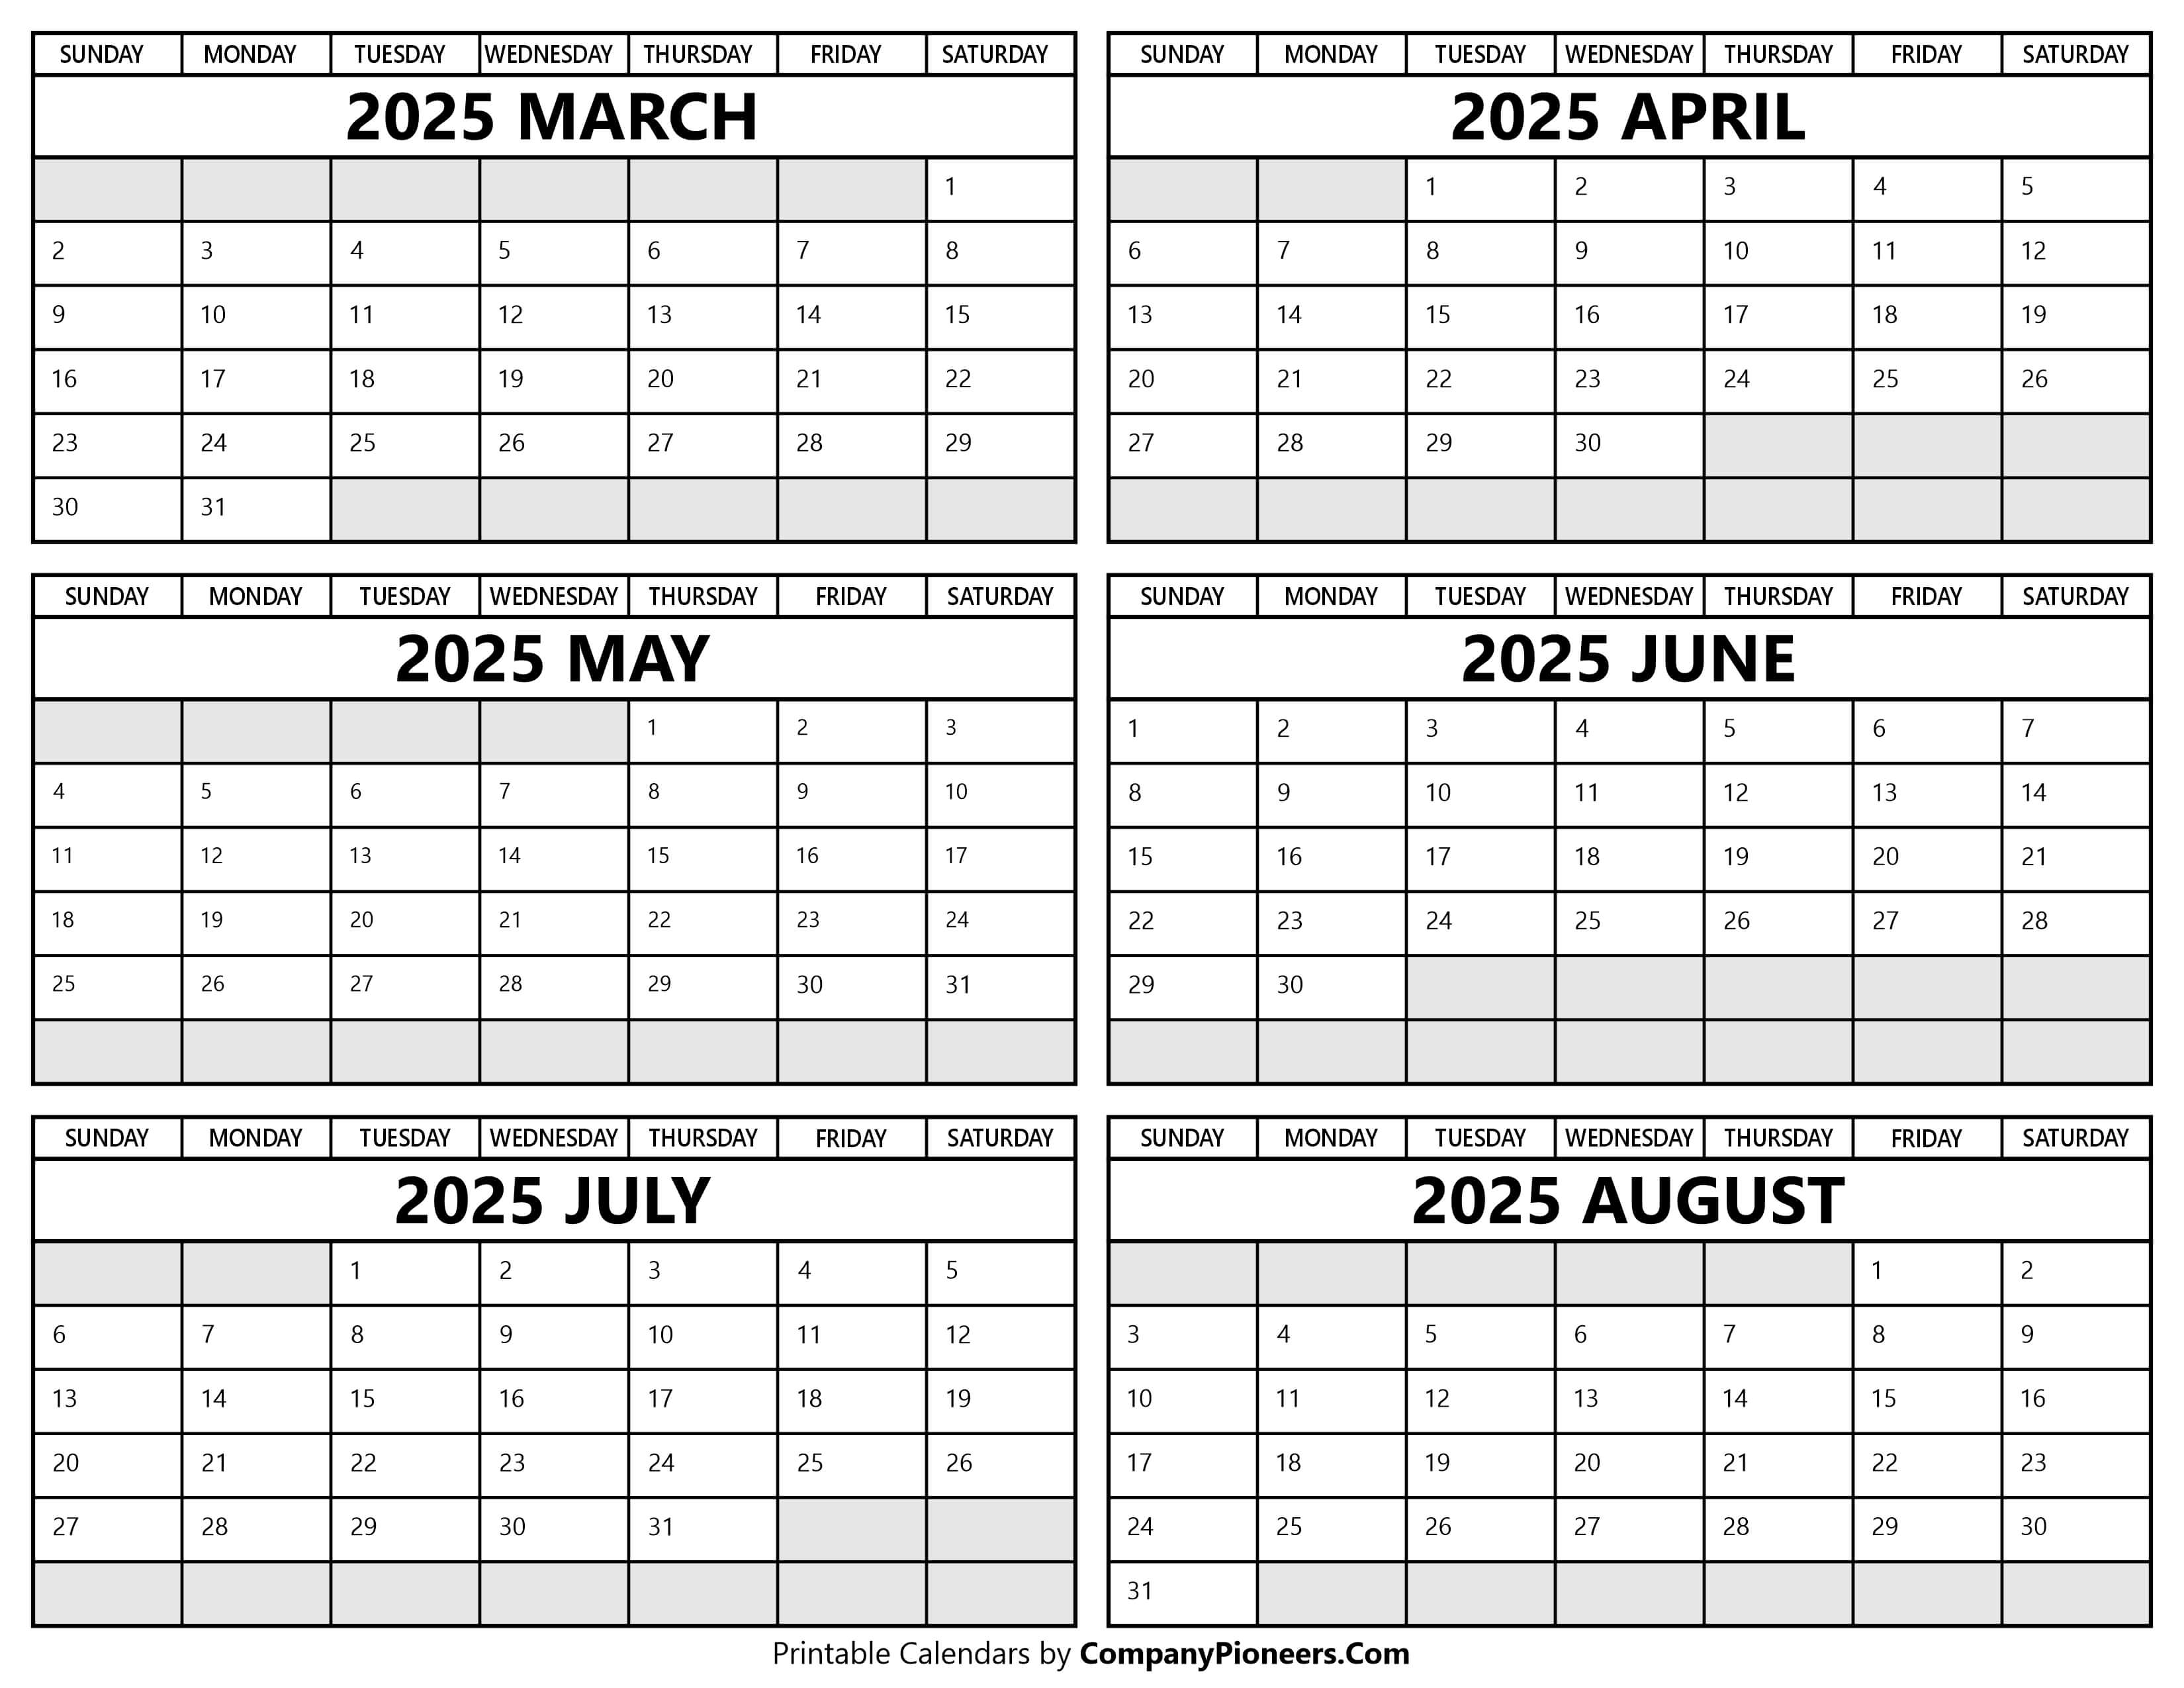 Printable 2025 March to August Calendar